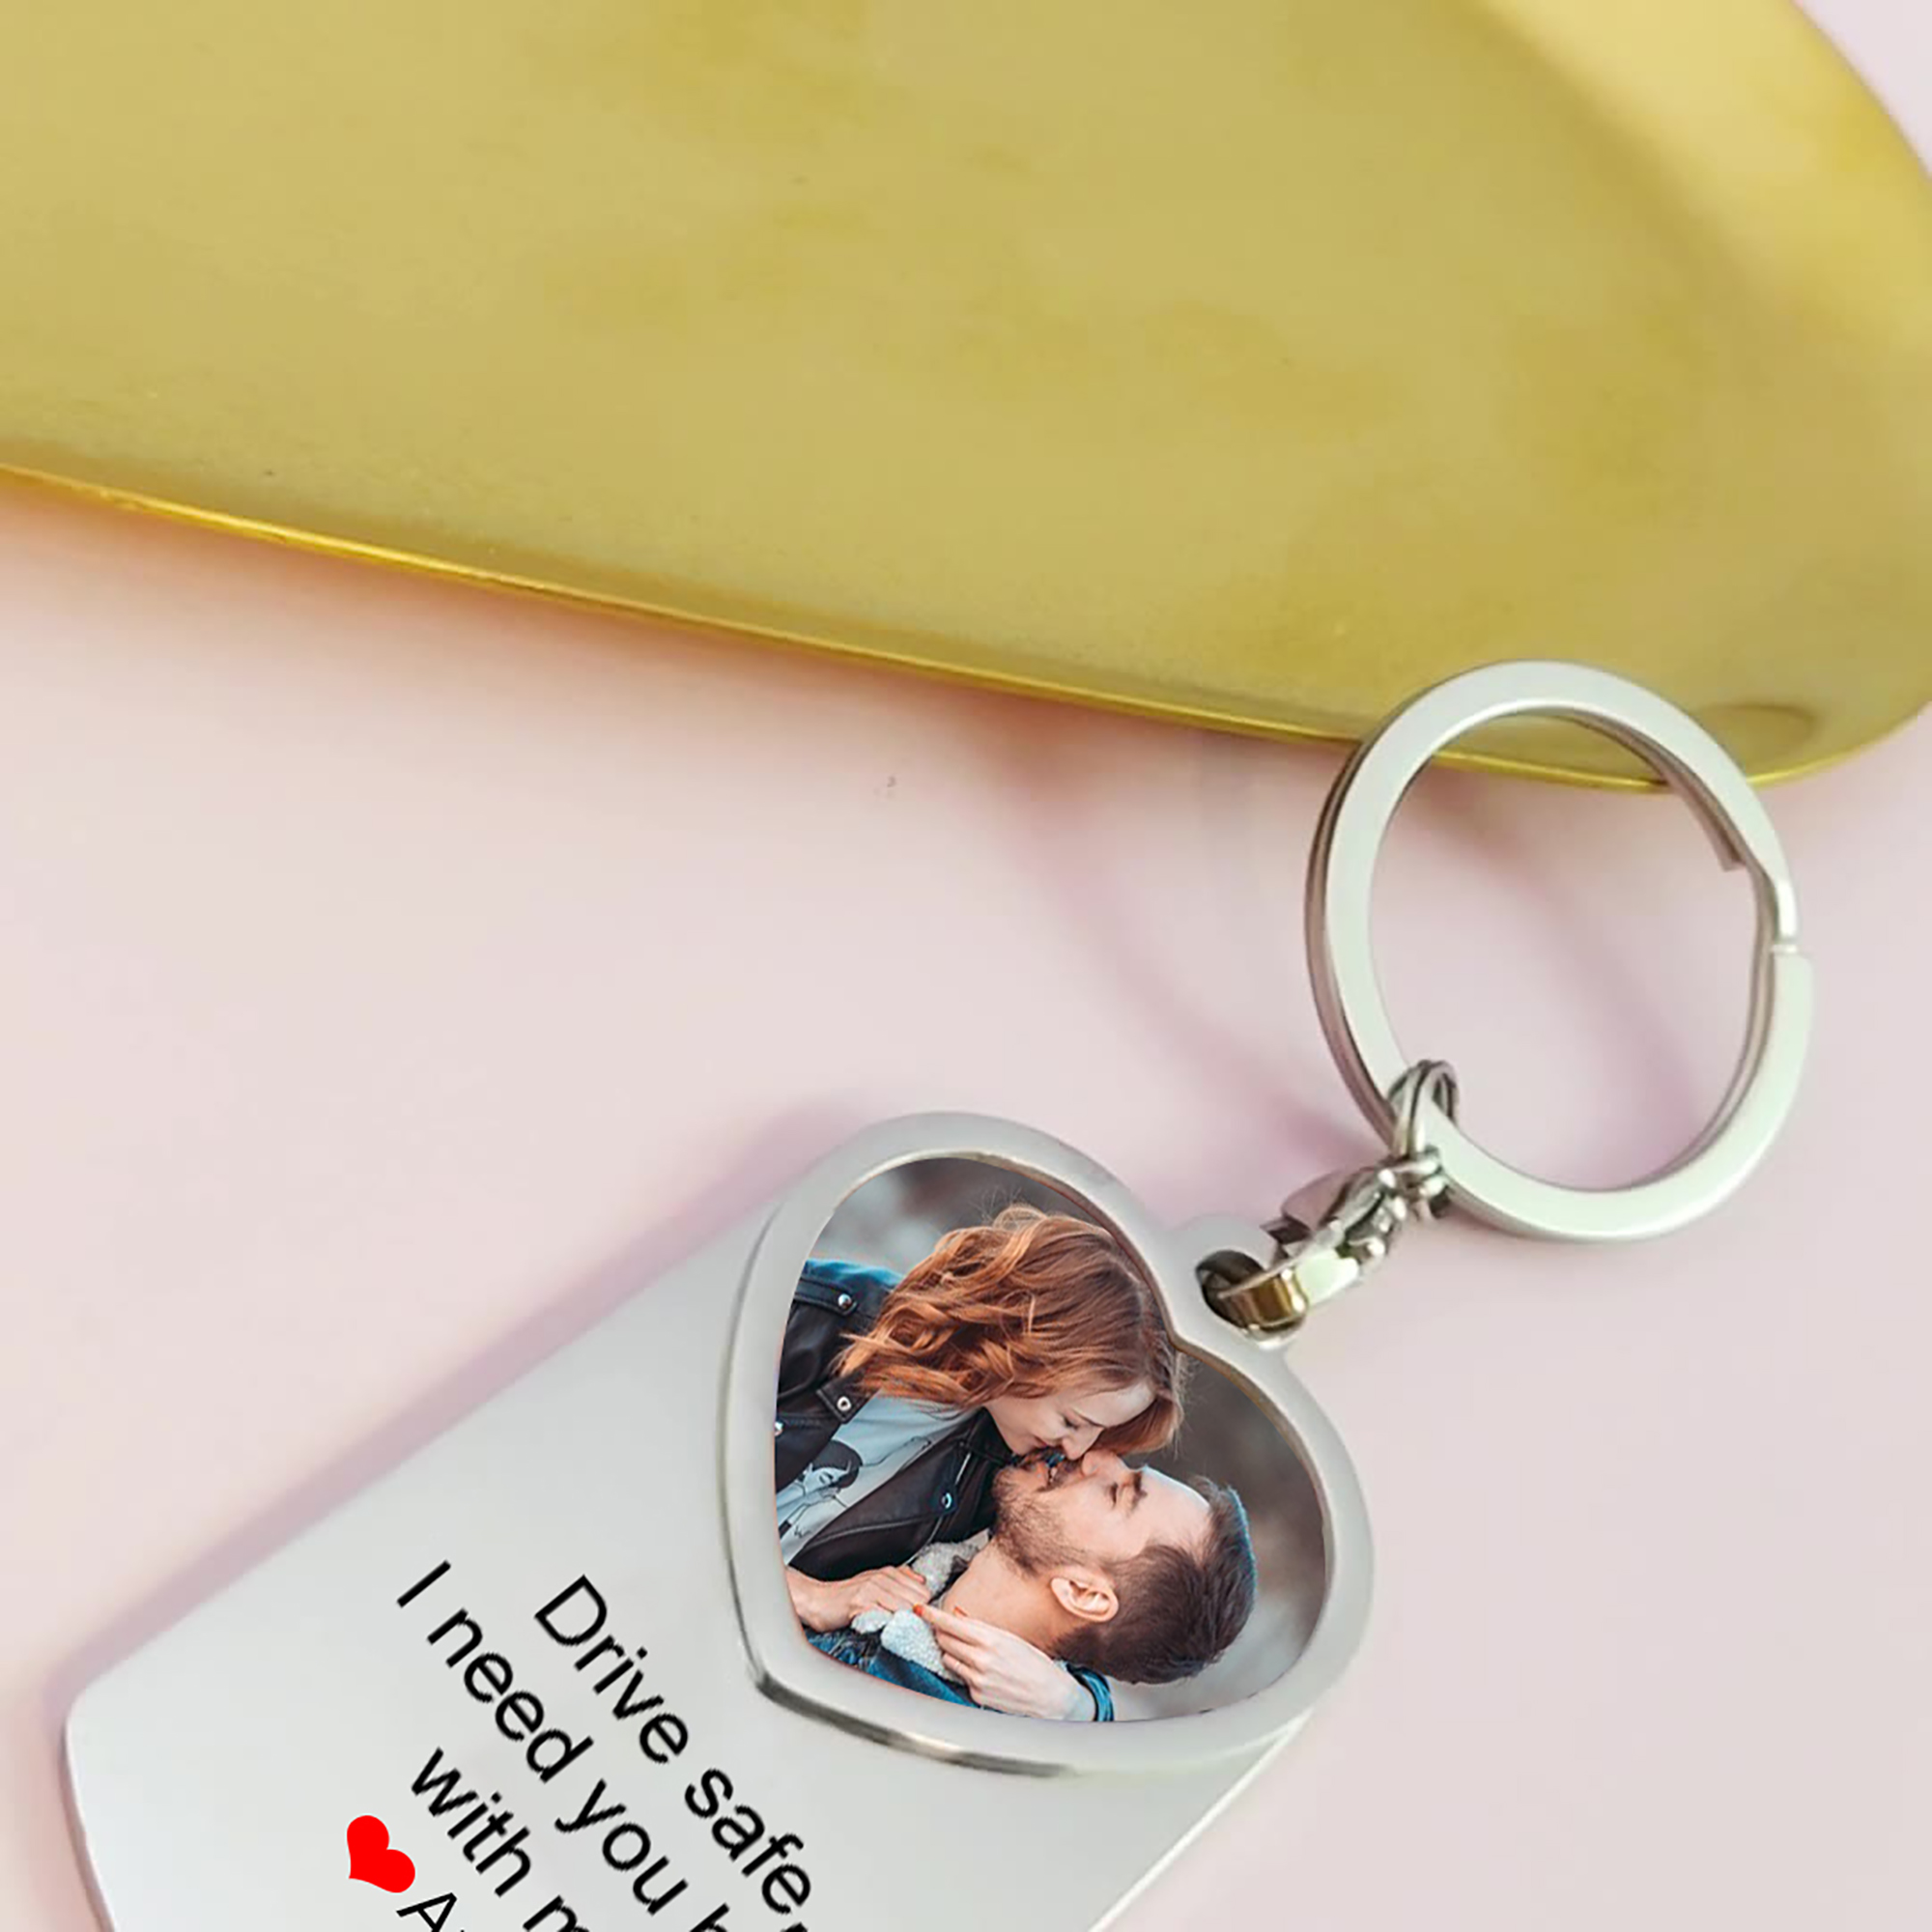 drive safe i need you personalized picture keychain for boy friend